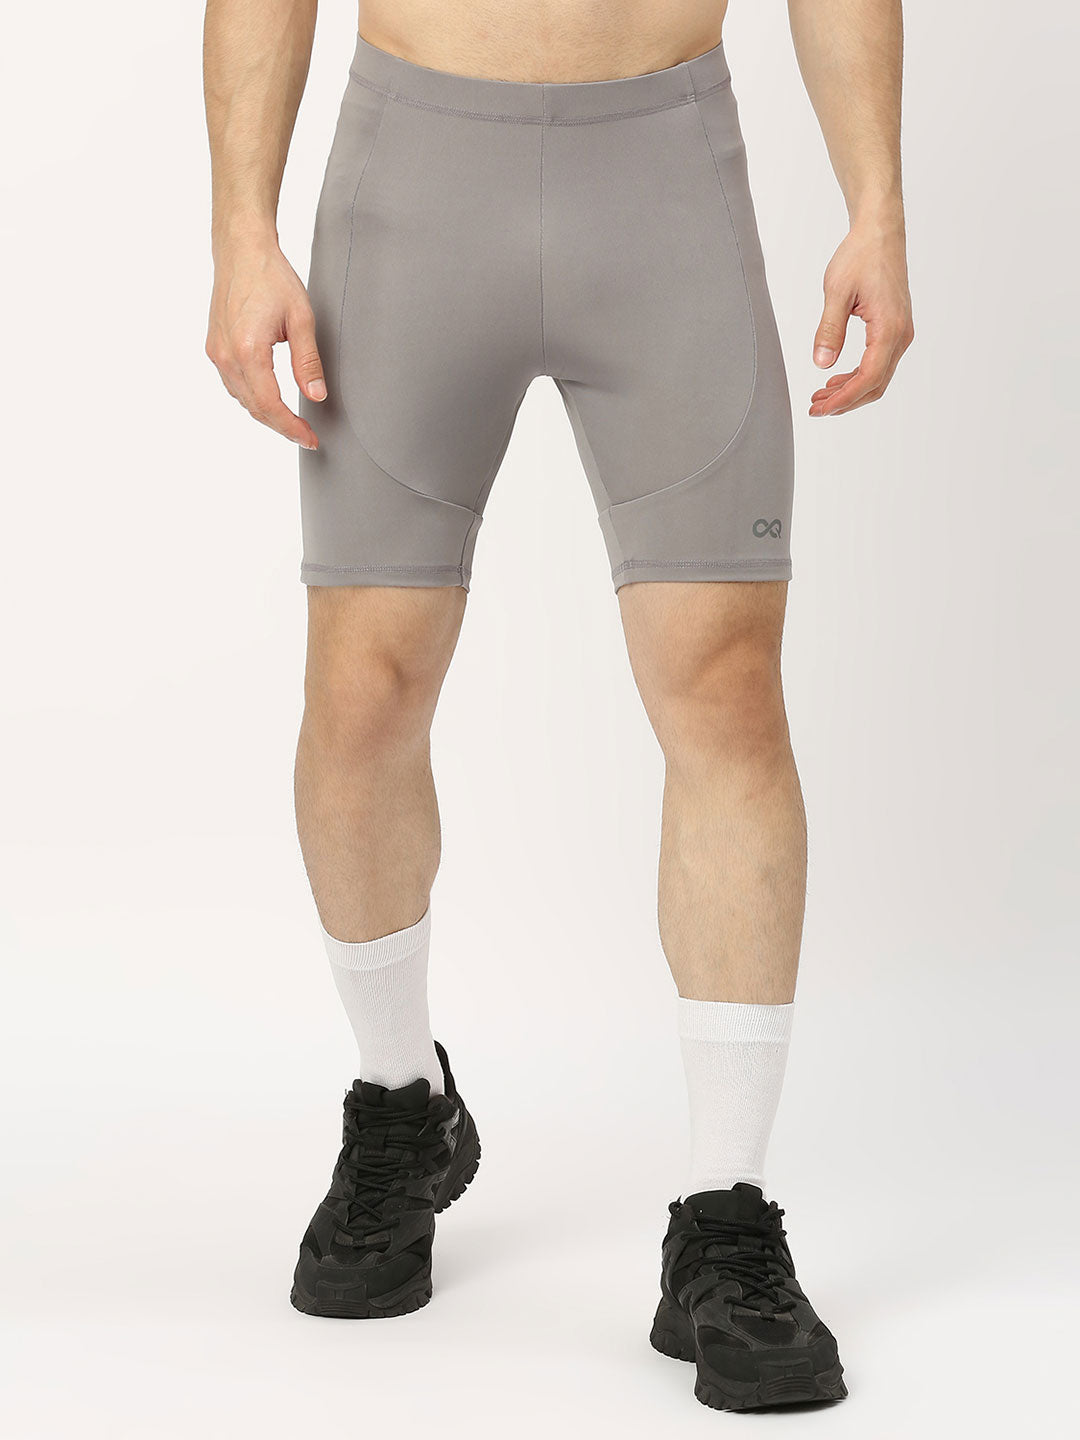 Shop Men's Grey Compression Shorts - Optimal Support and Performance